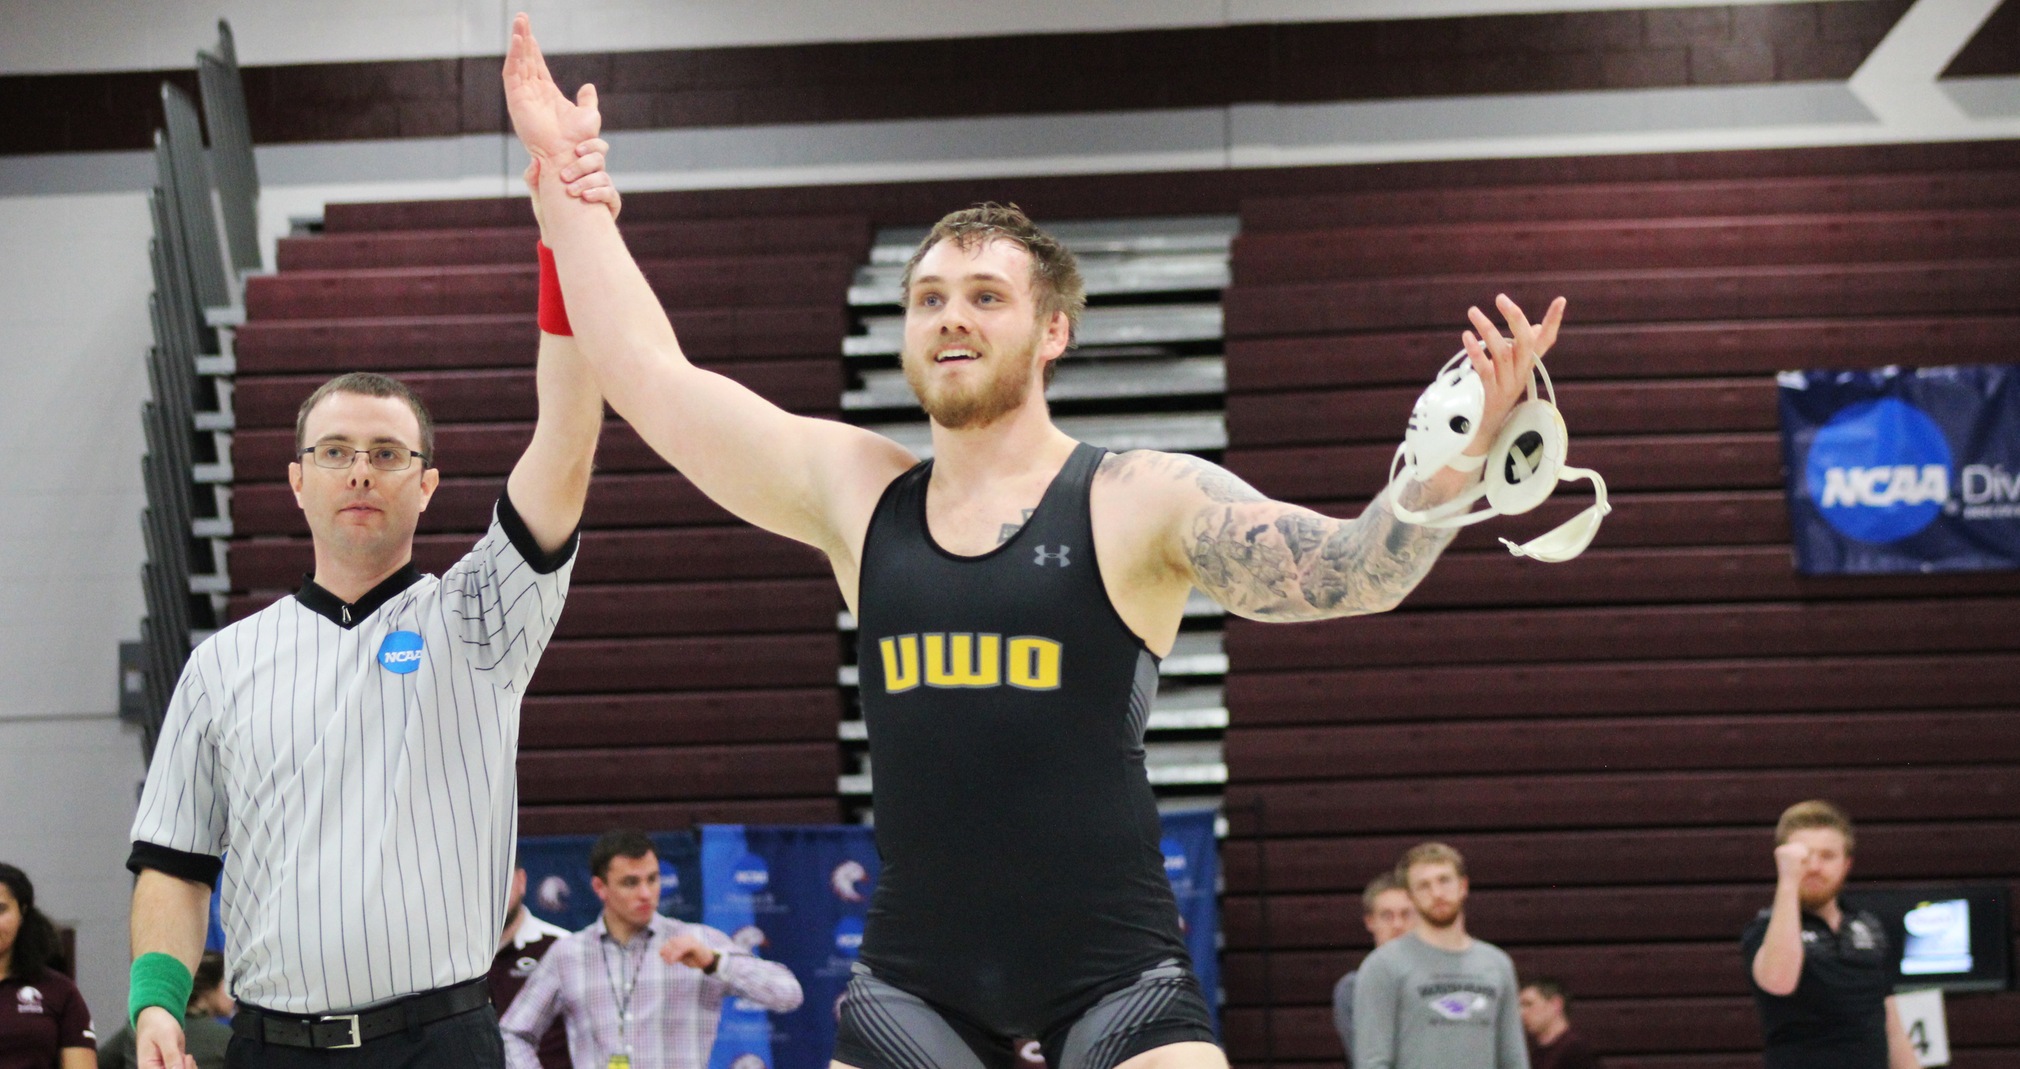 Jordan Lemcke went unbeaten at the Upper Midwest Regional to earn his first trip to nationals.